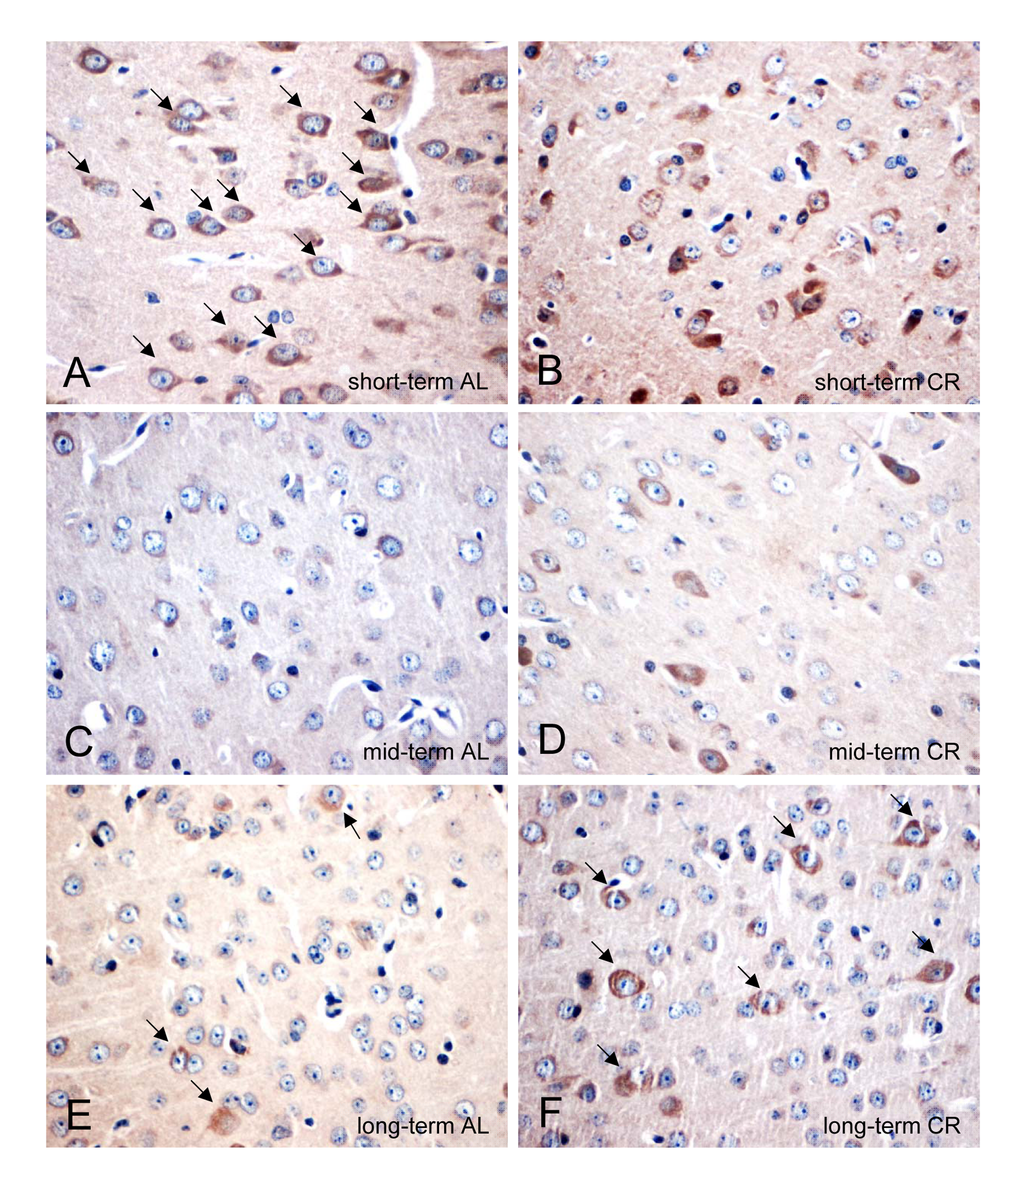 (A-F) Representative immunohistochemical images (original magnification x400) of PSD95 protein expression in brain of short-term (A and B), mid-term (C and D) and long-term (E and F) ad libitum- (AL, left panels) and caloric-restricted-fed (CR, right panels) ApoE-/- mice. Mice were fed either AL or CR (60% of ad libitum) for a short-term (4 weeks; n=14), mid-term (20 weeks; n=14) or long-term (64 weeks; n=14). Note the decrease of PSD95-positive neurons in the AL-fed ApoE-/- mice while a long-term CR delayed the decline of PSD95-positive neurons in the ApoE-/- mice (indicated by arrows).